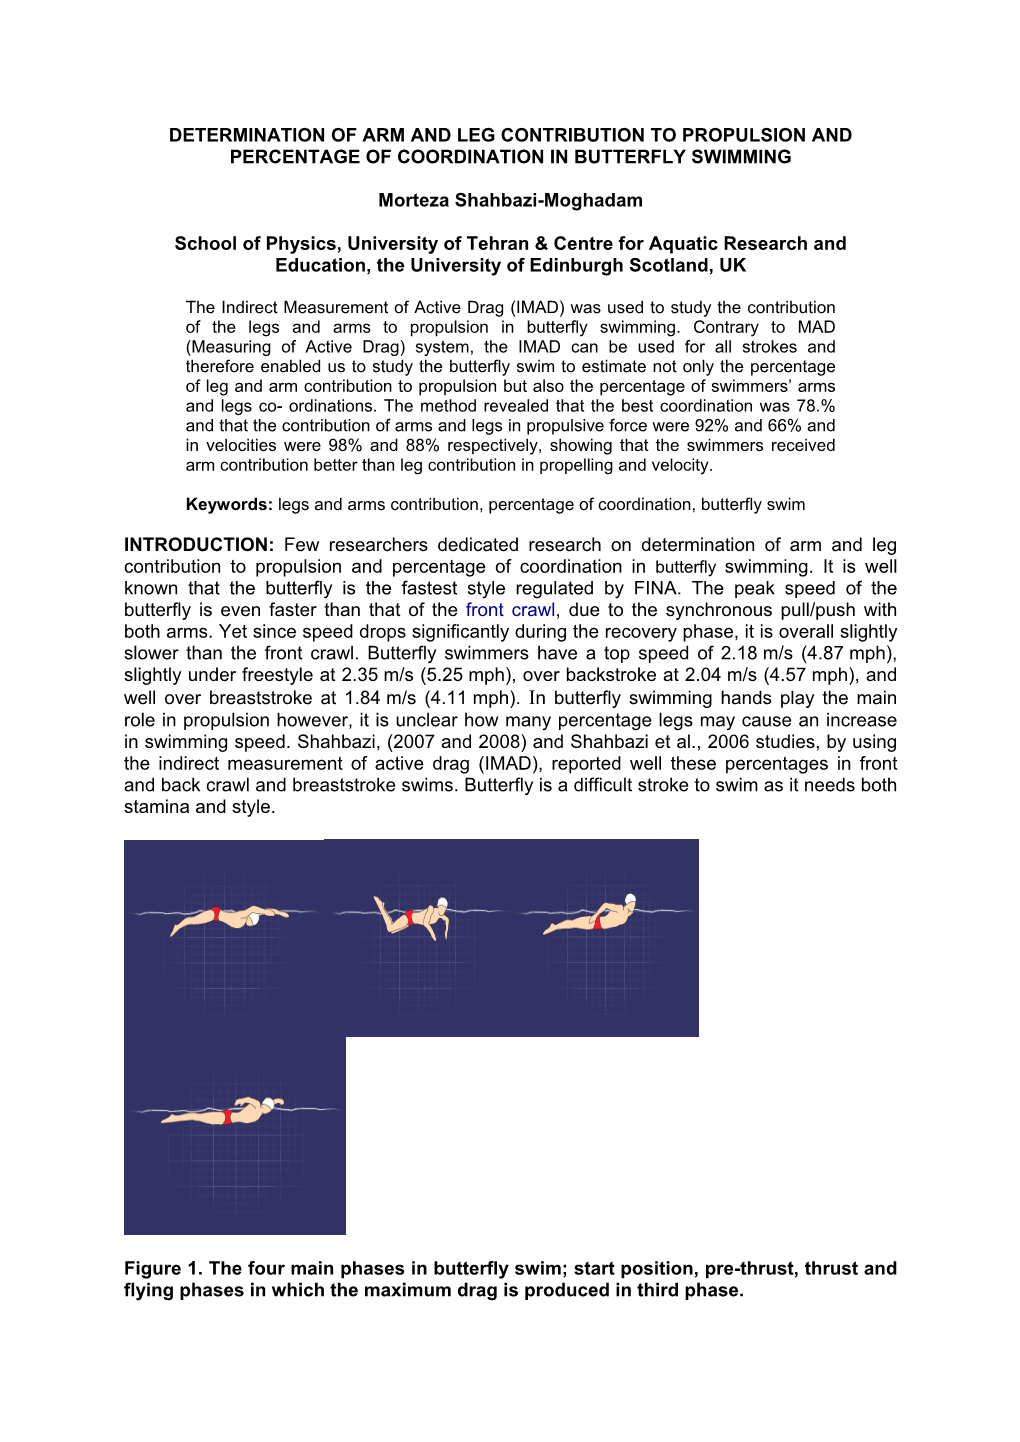 Determination of Arm and Leg Contribution to Propulsion and Percentage of Coordination in Butterfly Swimming